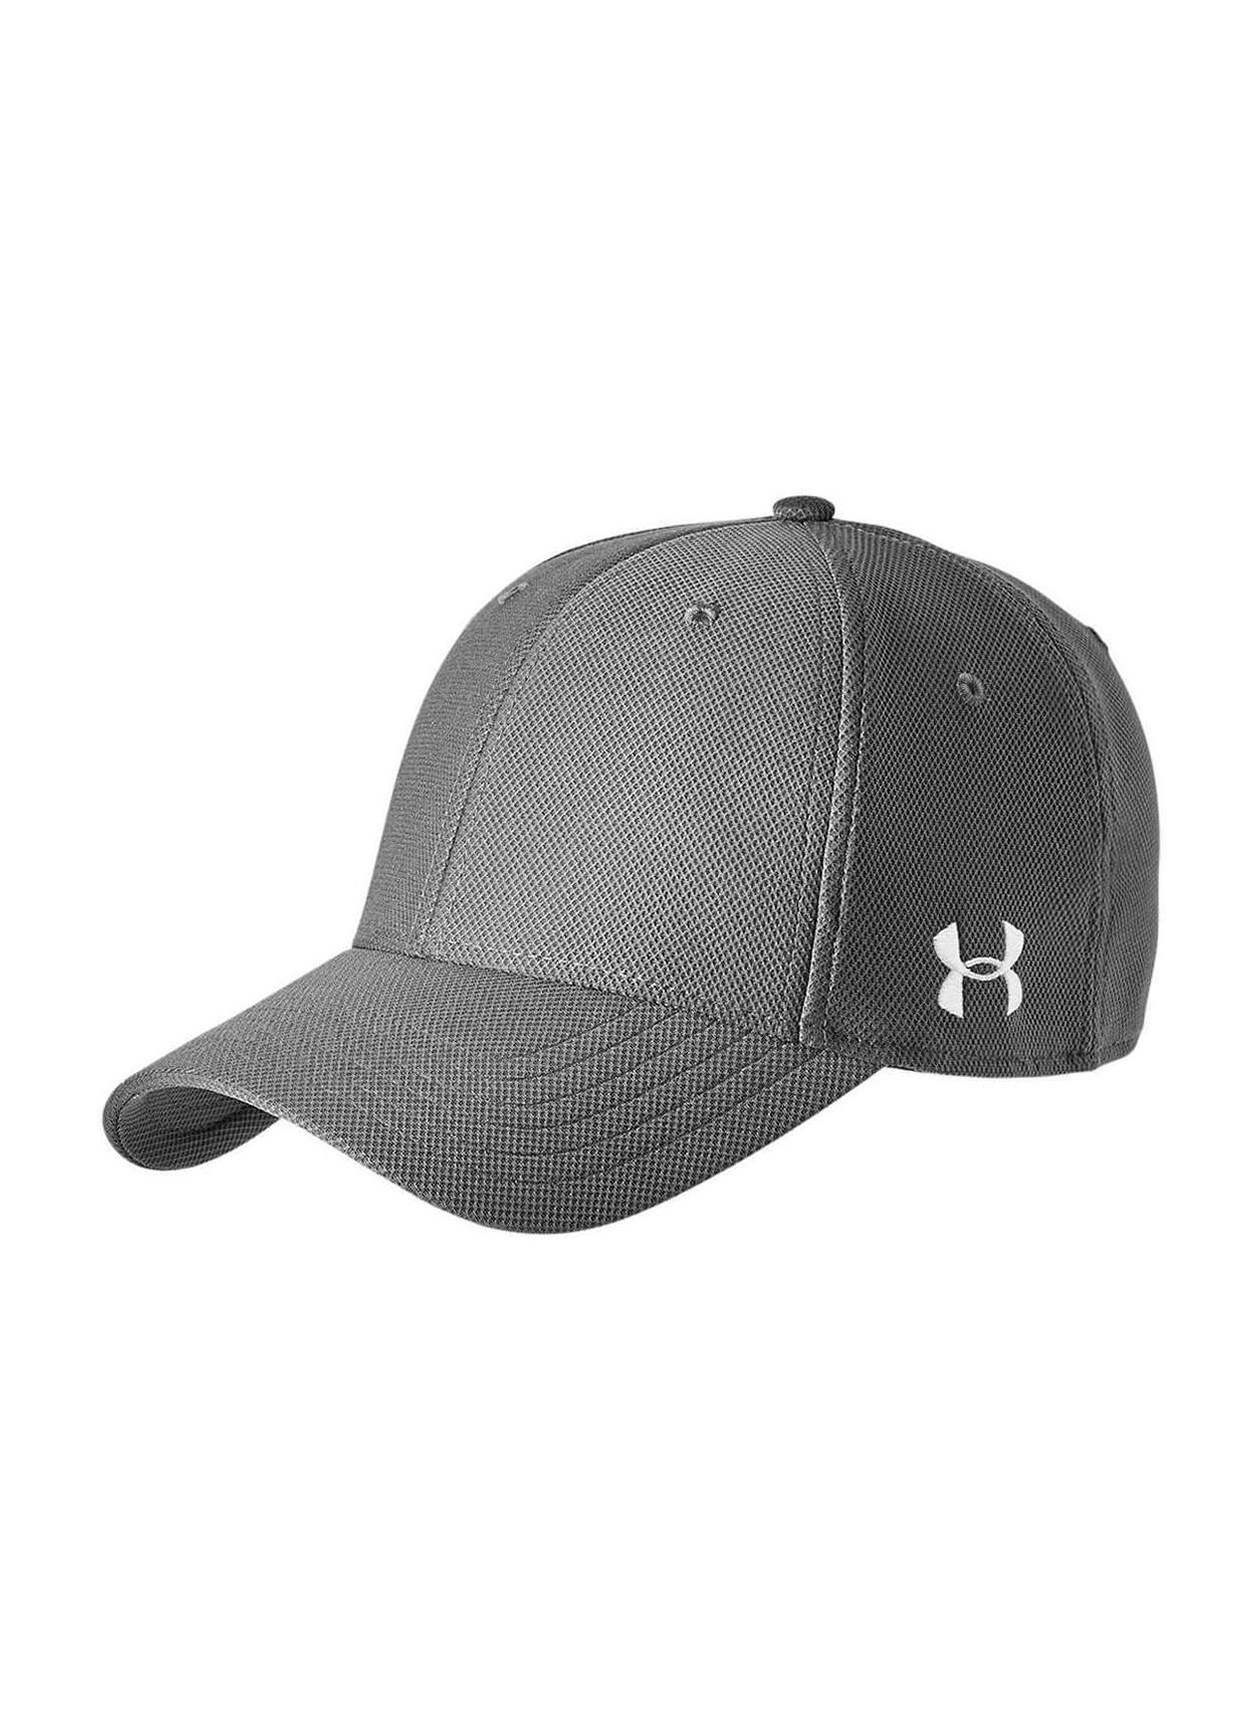 Hat Under Under Curved | Blitzing Armour Graphite Armour